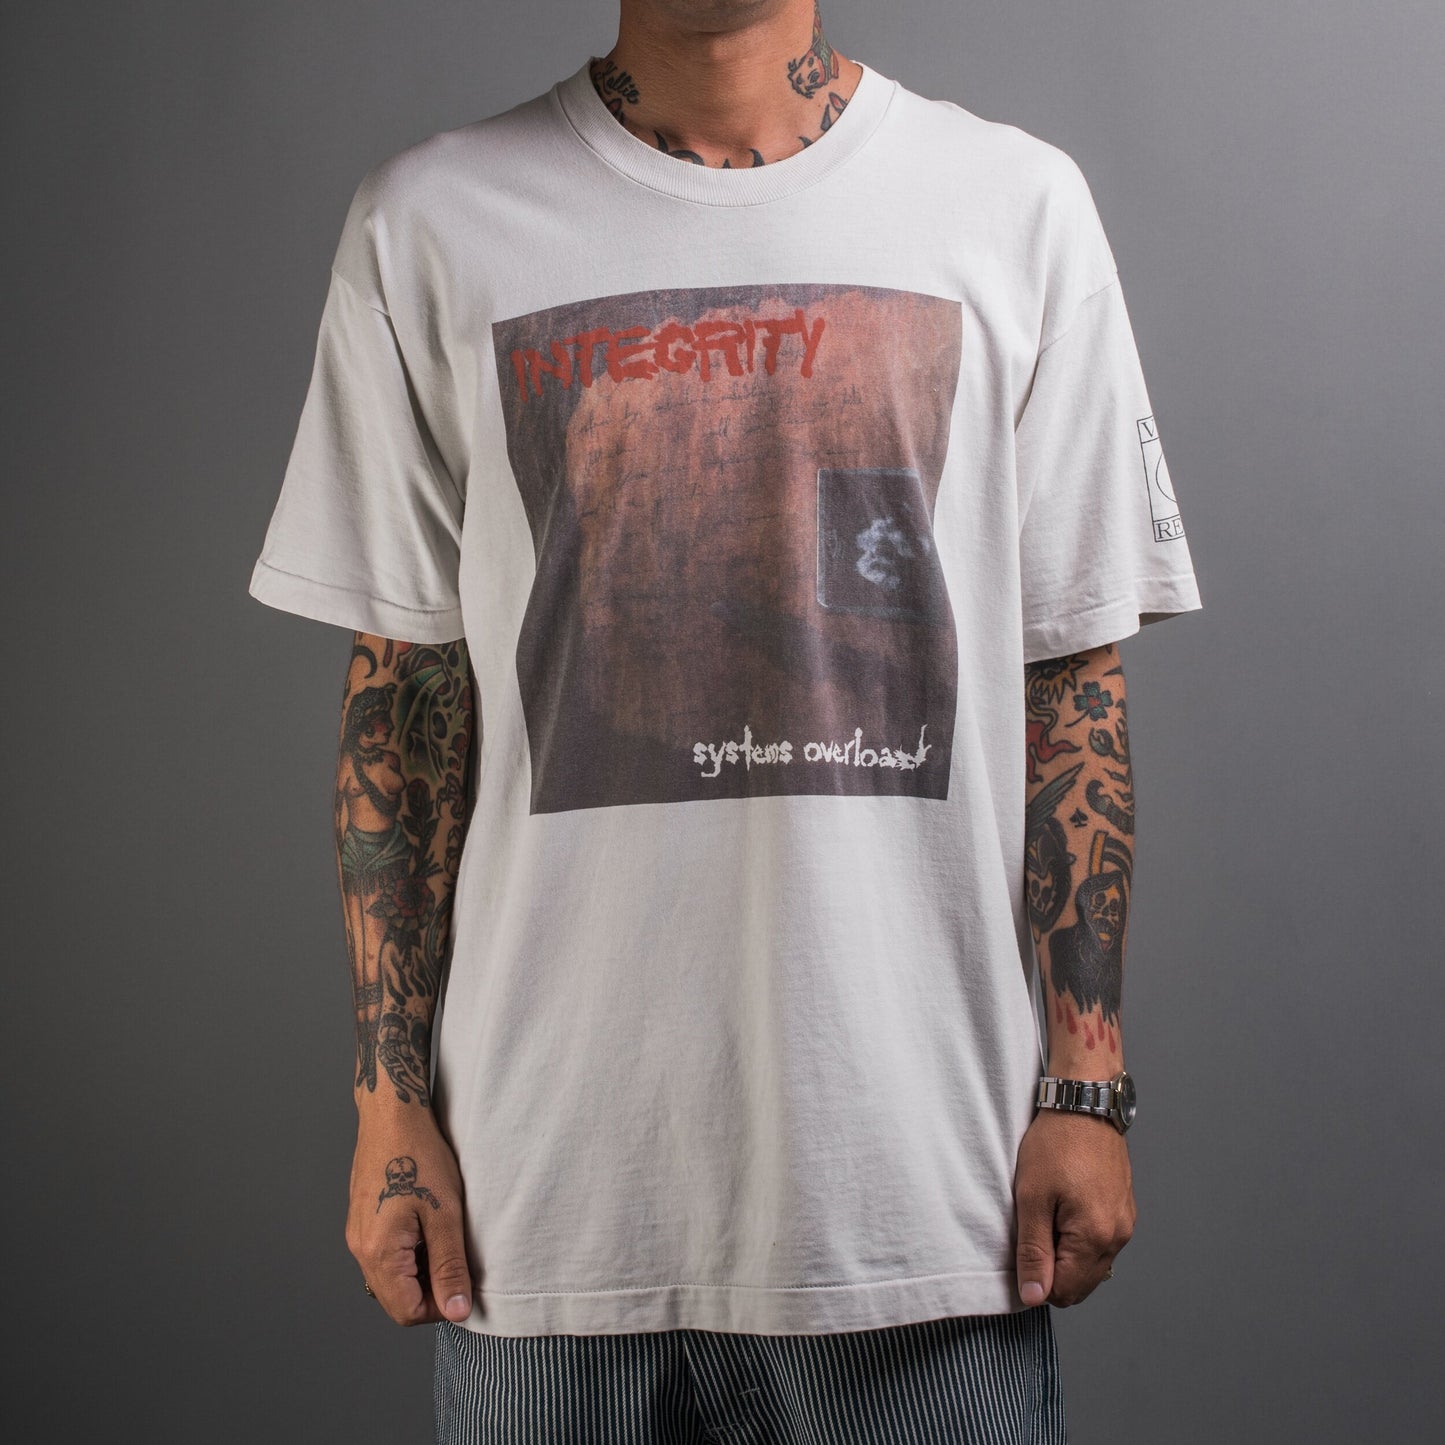 Vintage 90’s Integrity Systems Overload T-Shirt